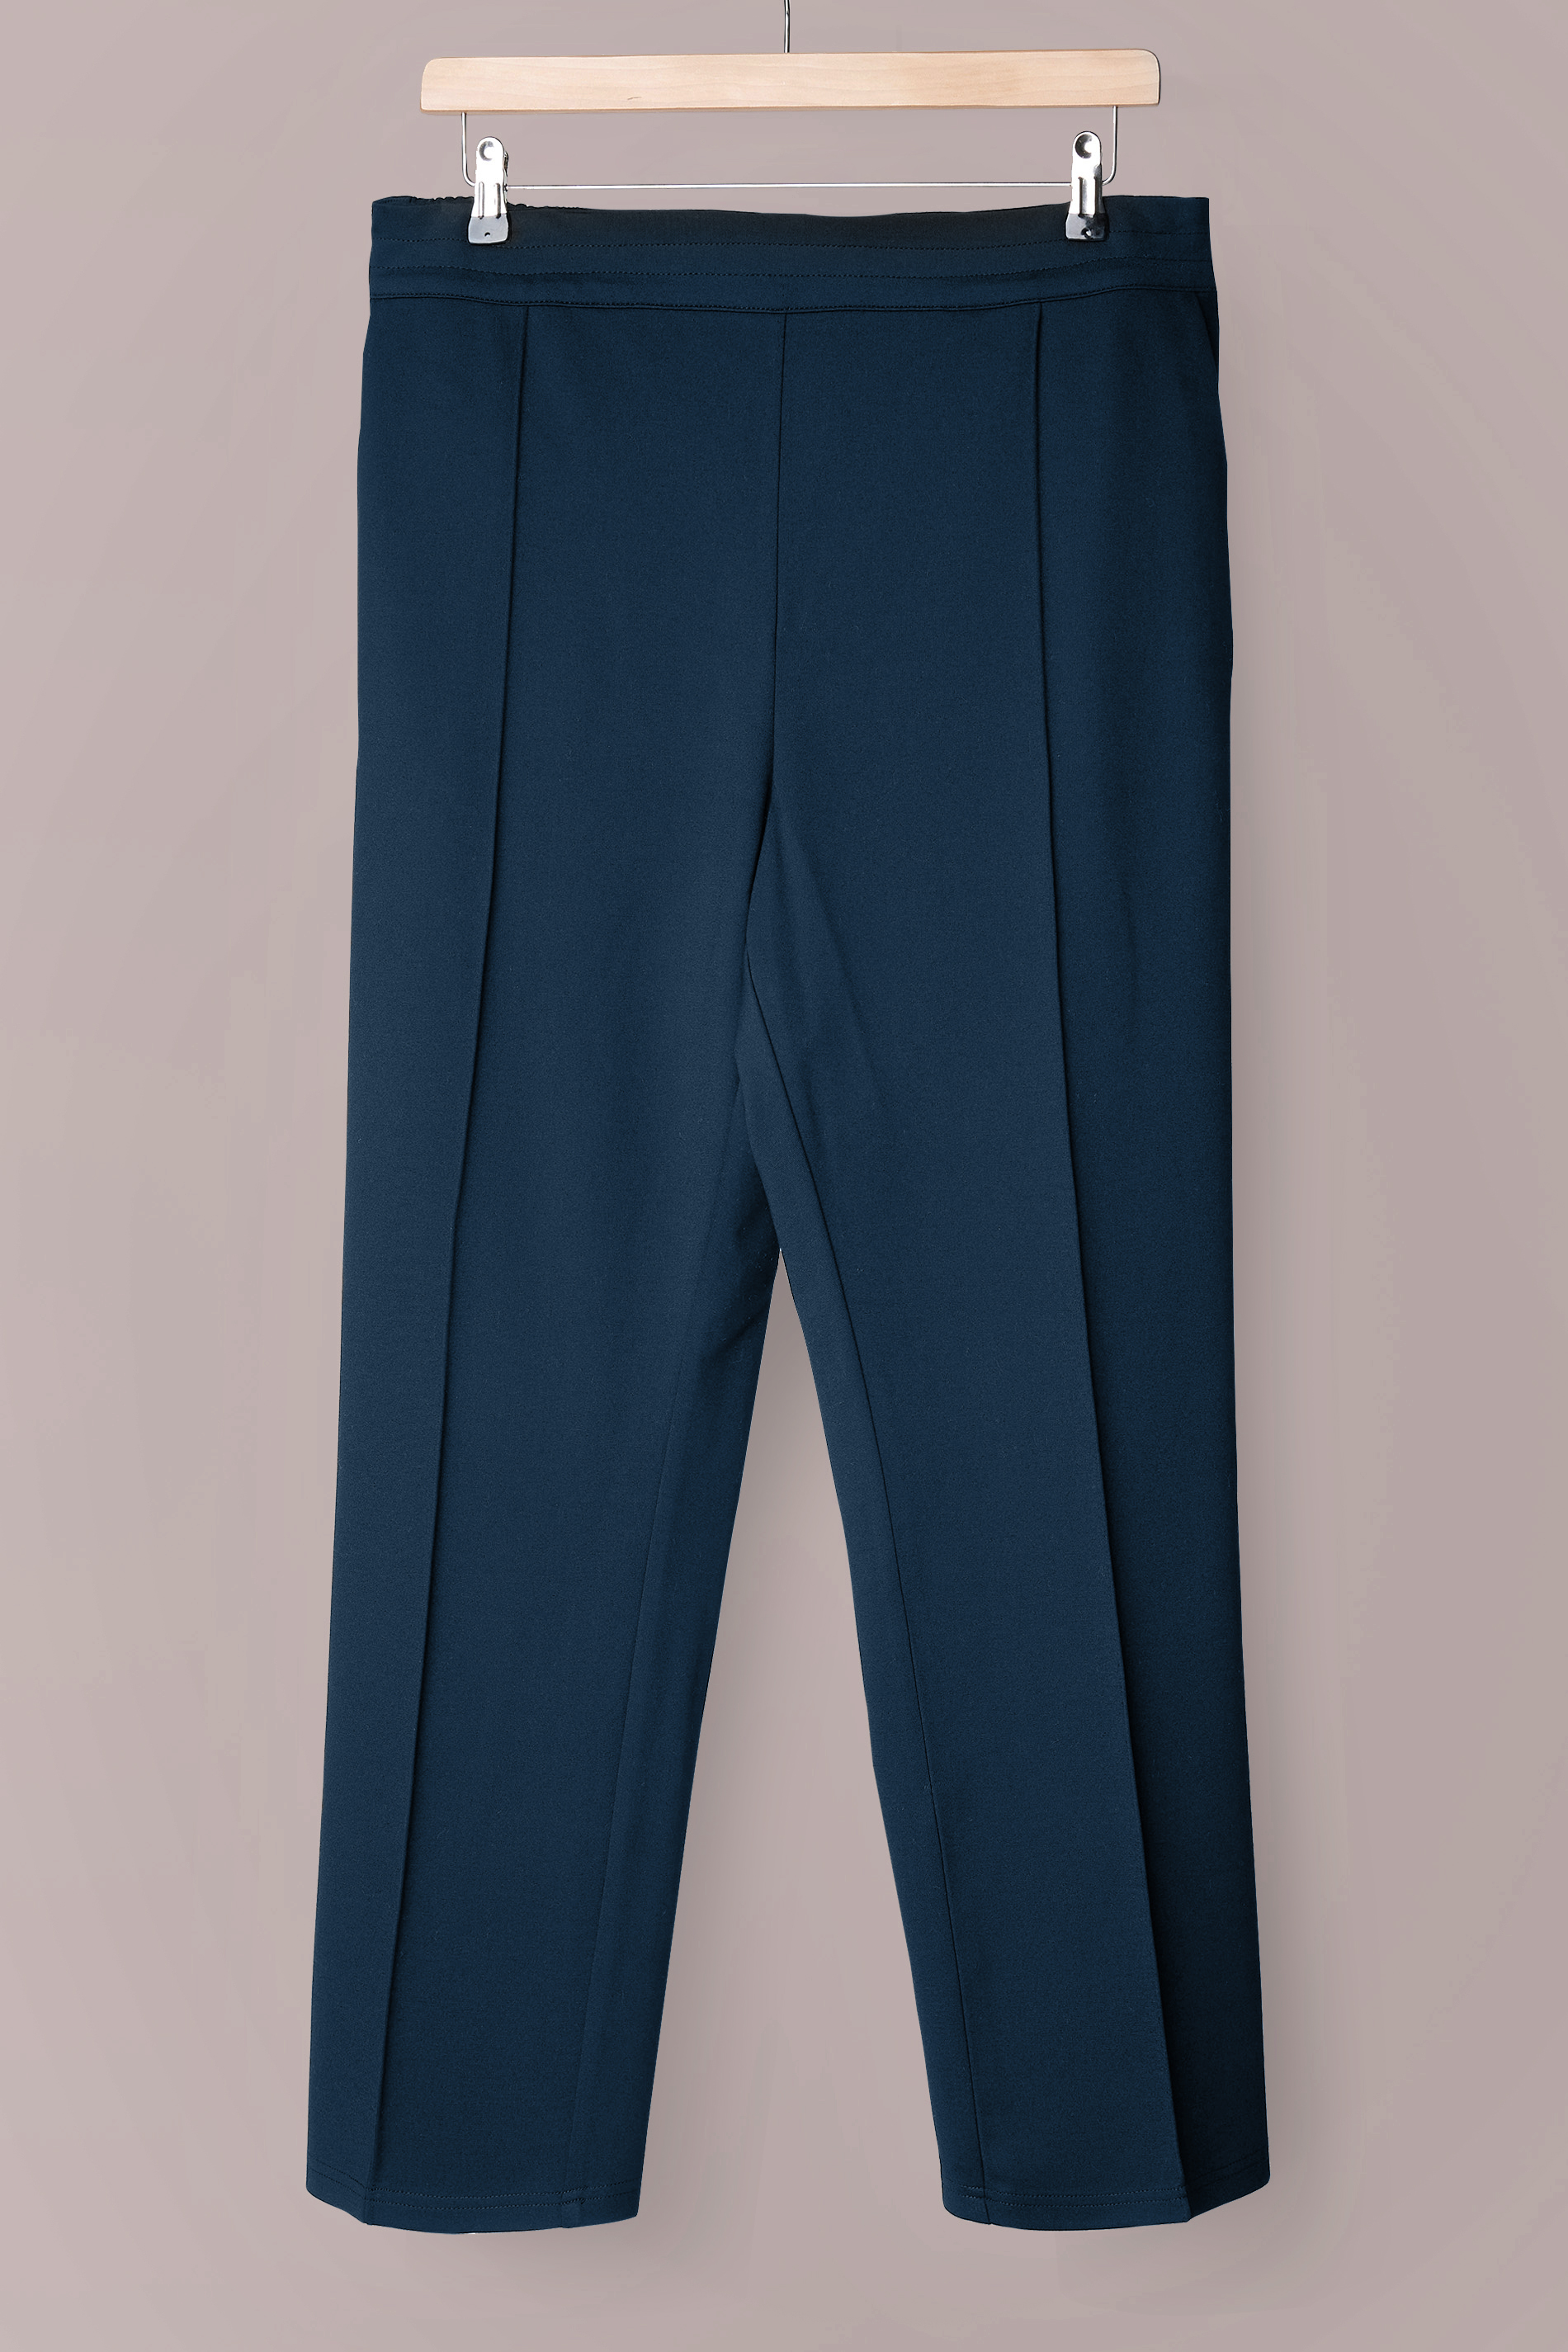 Lucy Adaptive Straight Leg Pant - Seated Fit In Navy